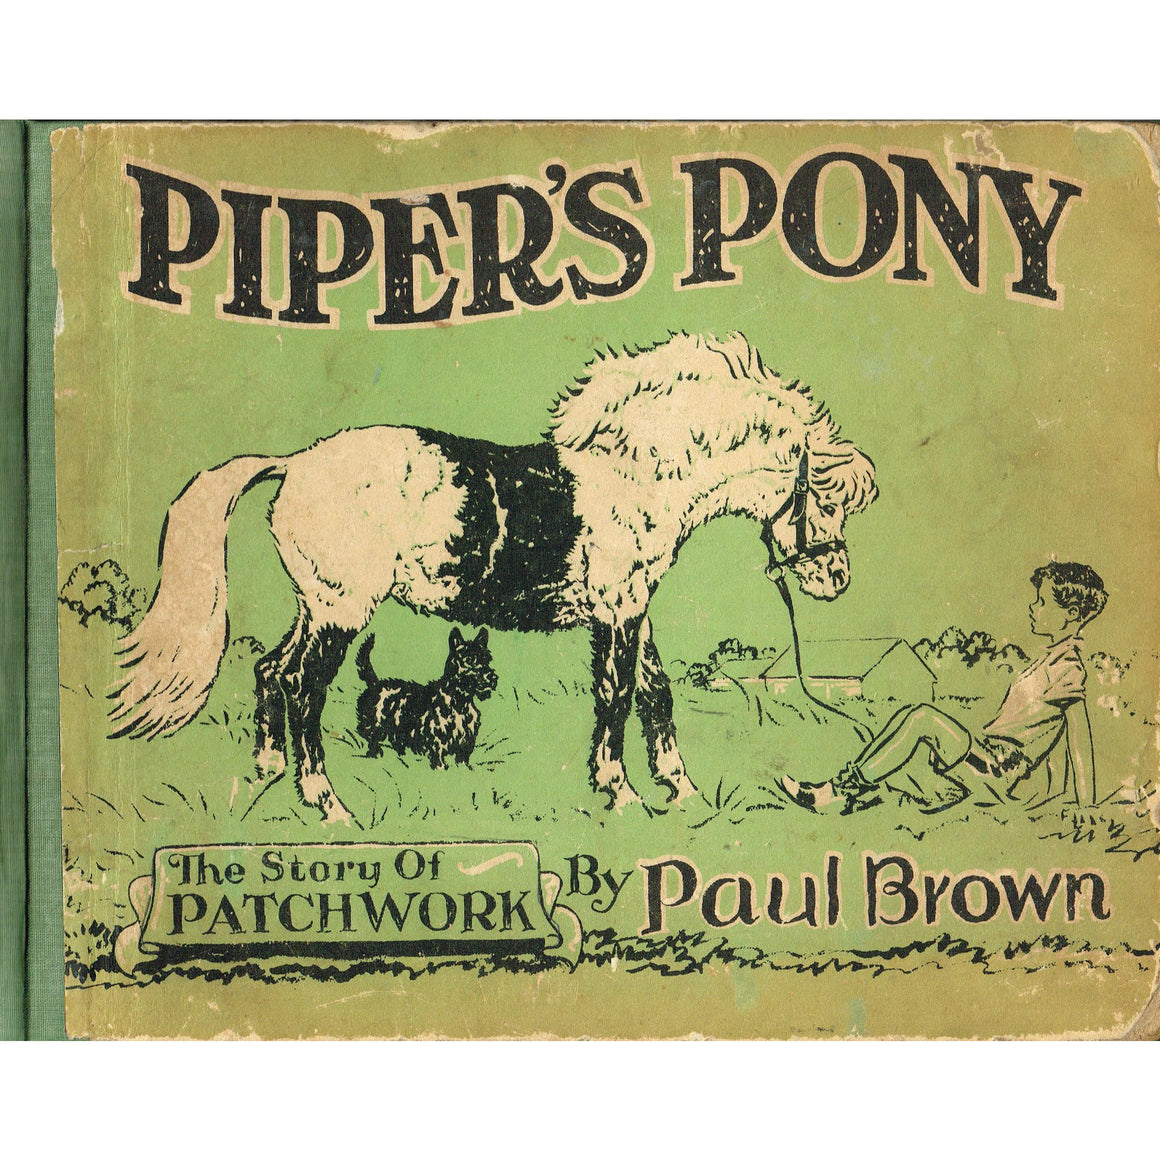 Piper's Pony: A story of Patchwork